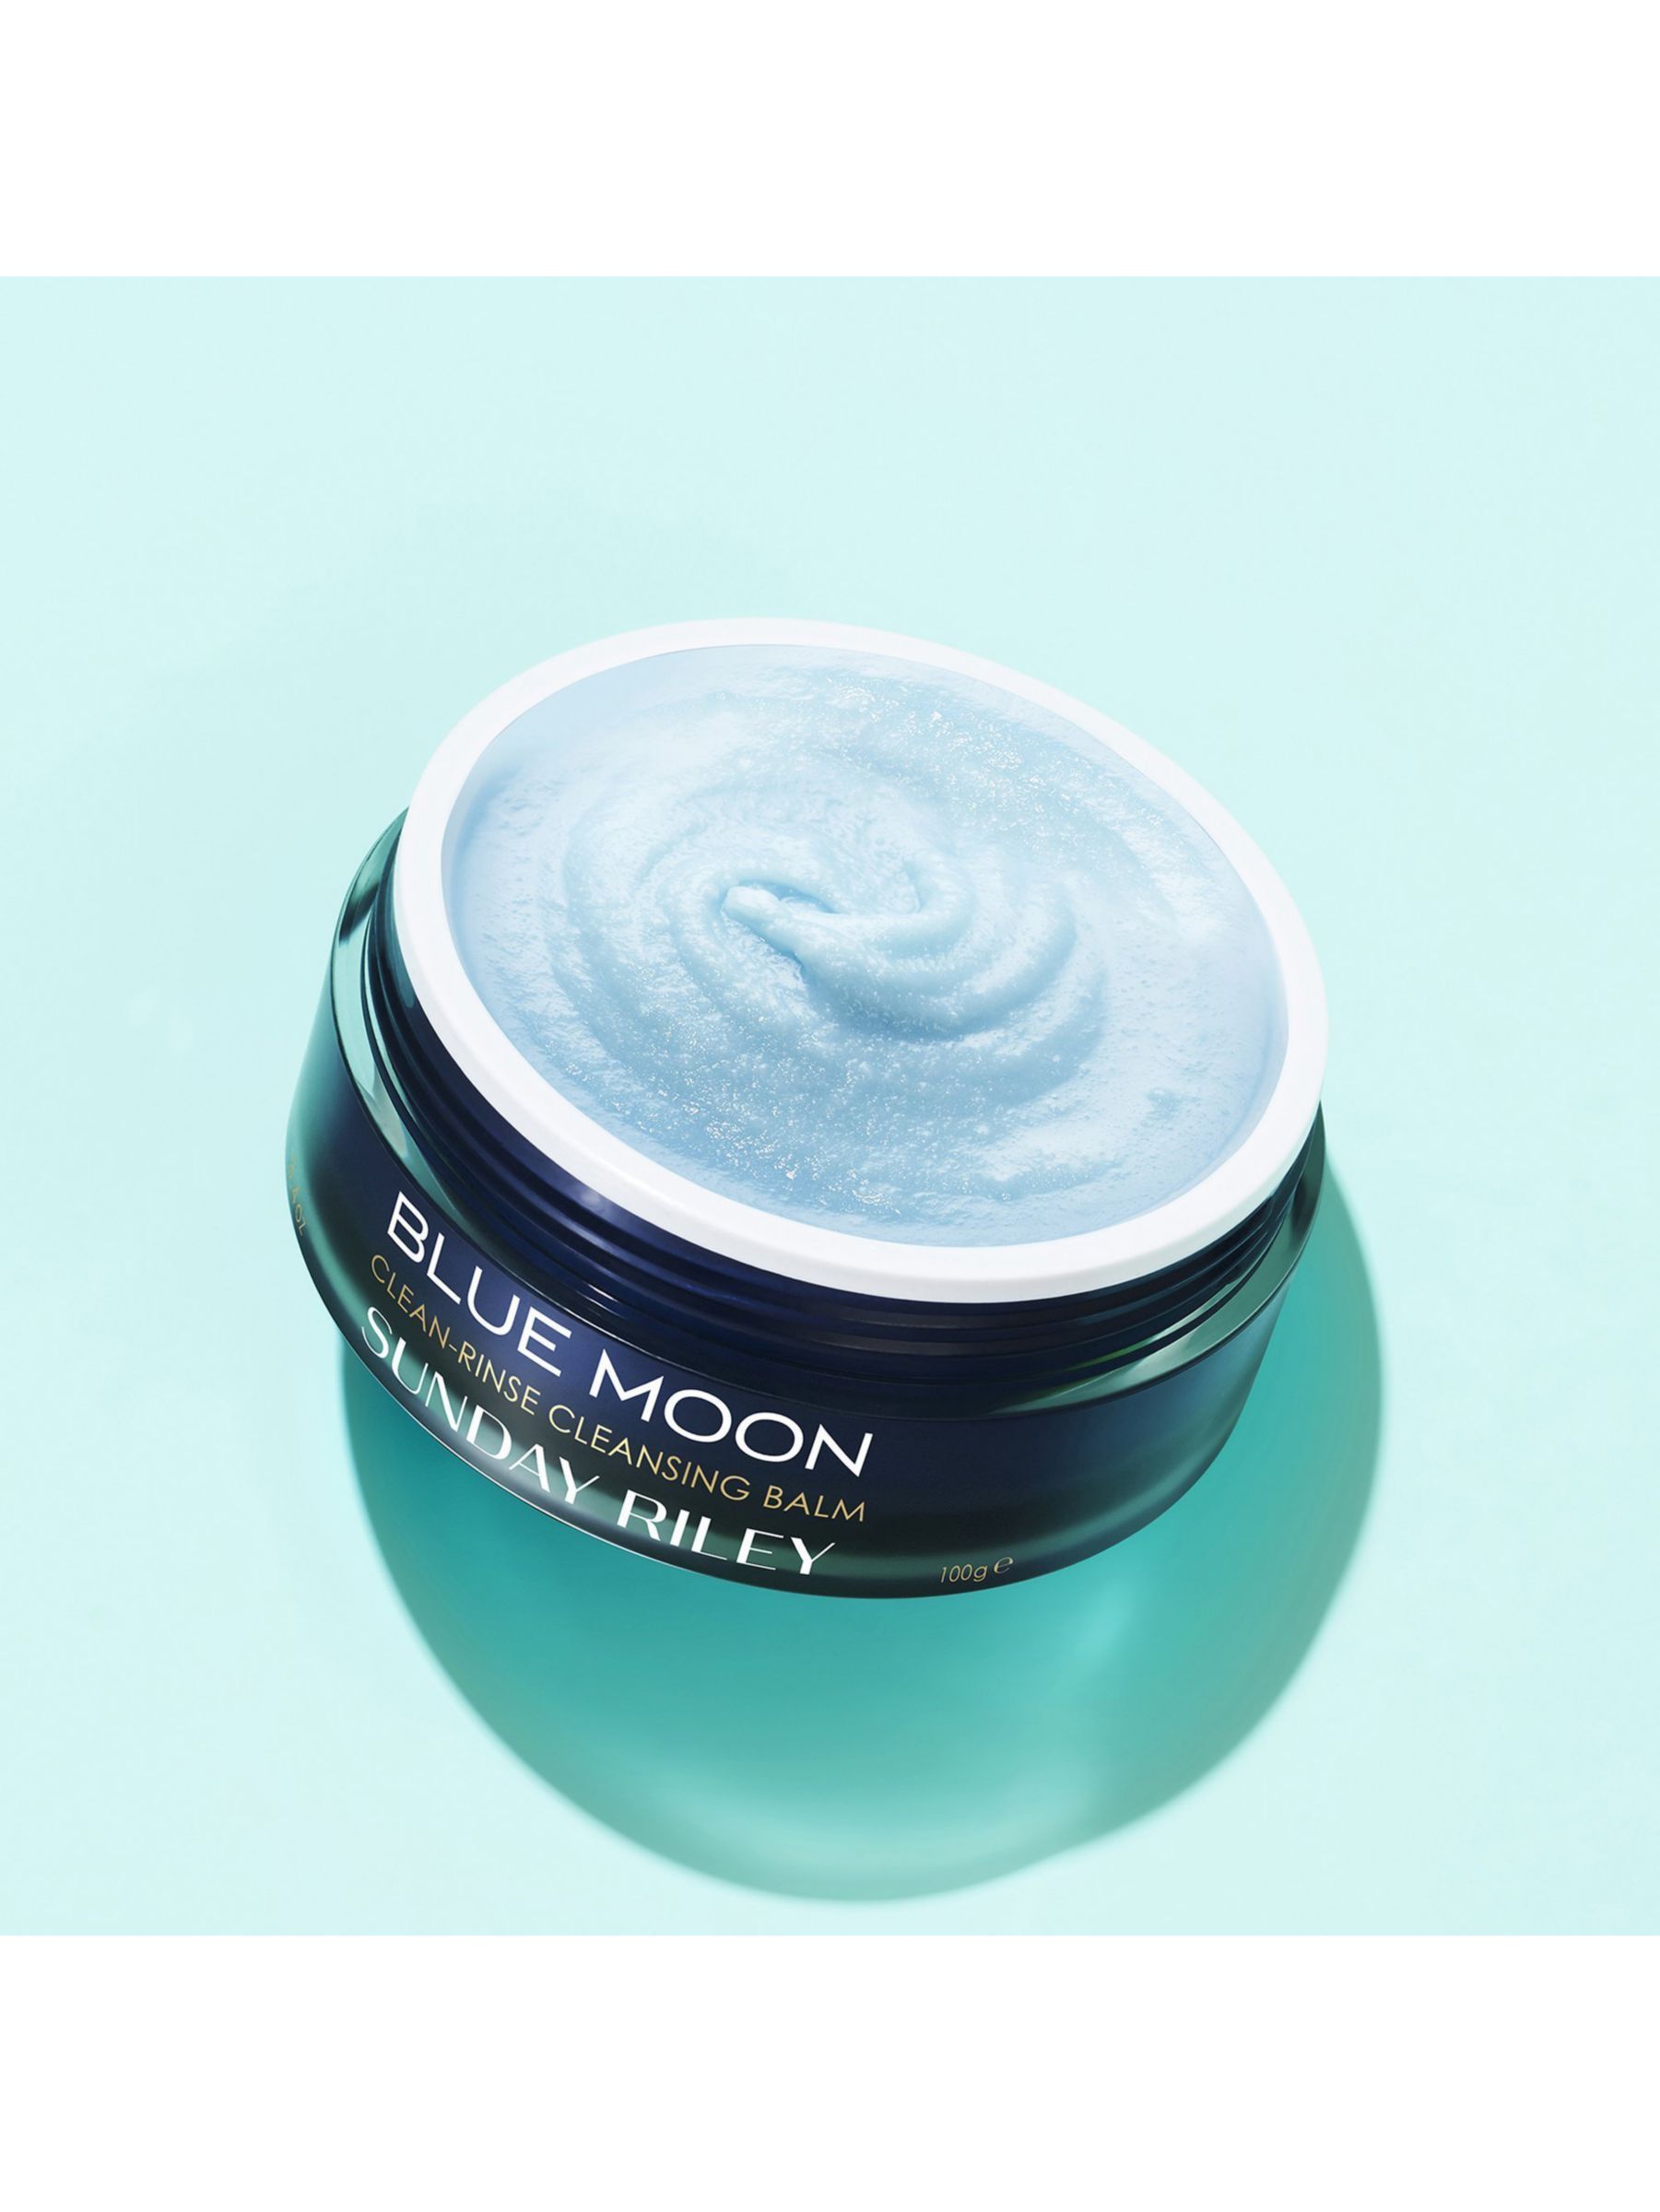 Sunday Riley Blue Moon Tranquility Cleansing Balm, 100g 3